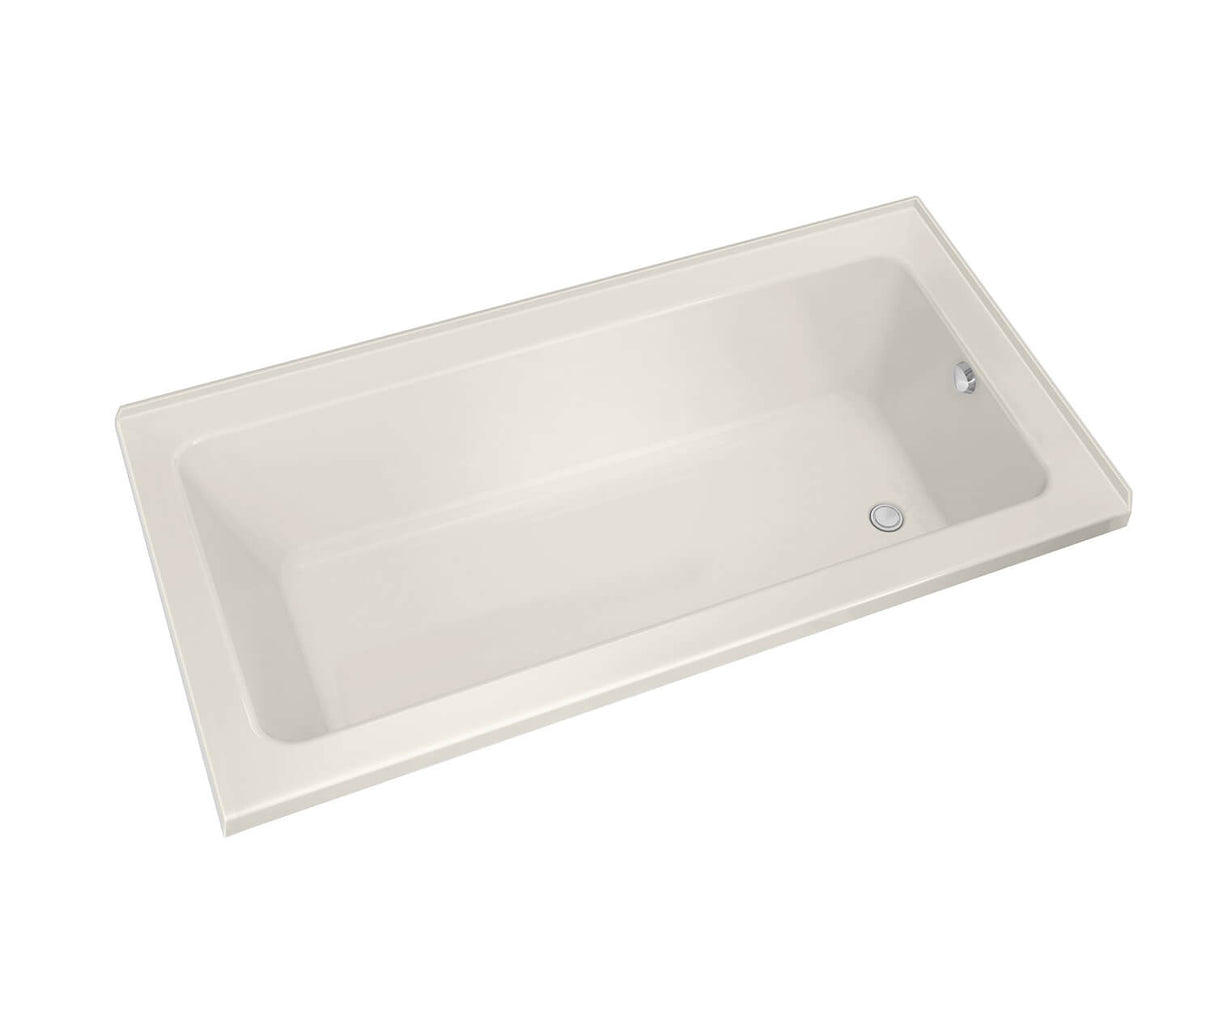 MAAX 106212-R-000-007 Pose 7236 IF Acrylic Corner Right Right-Hand Drain Bathtub in Biscuit